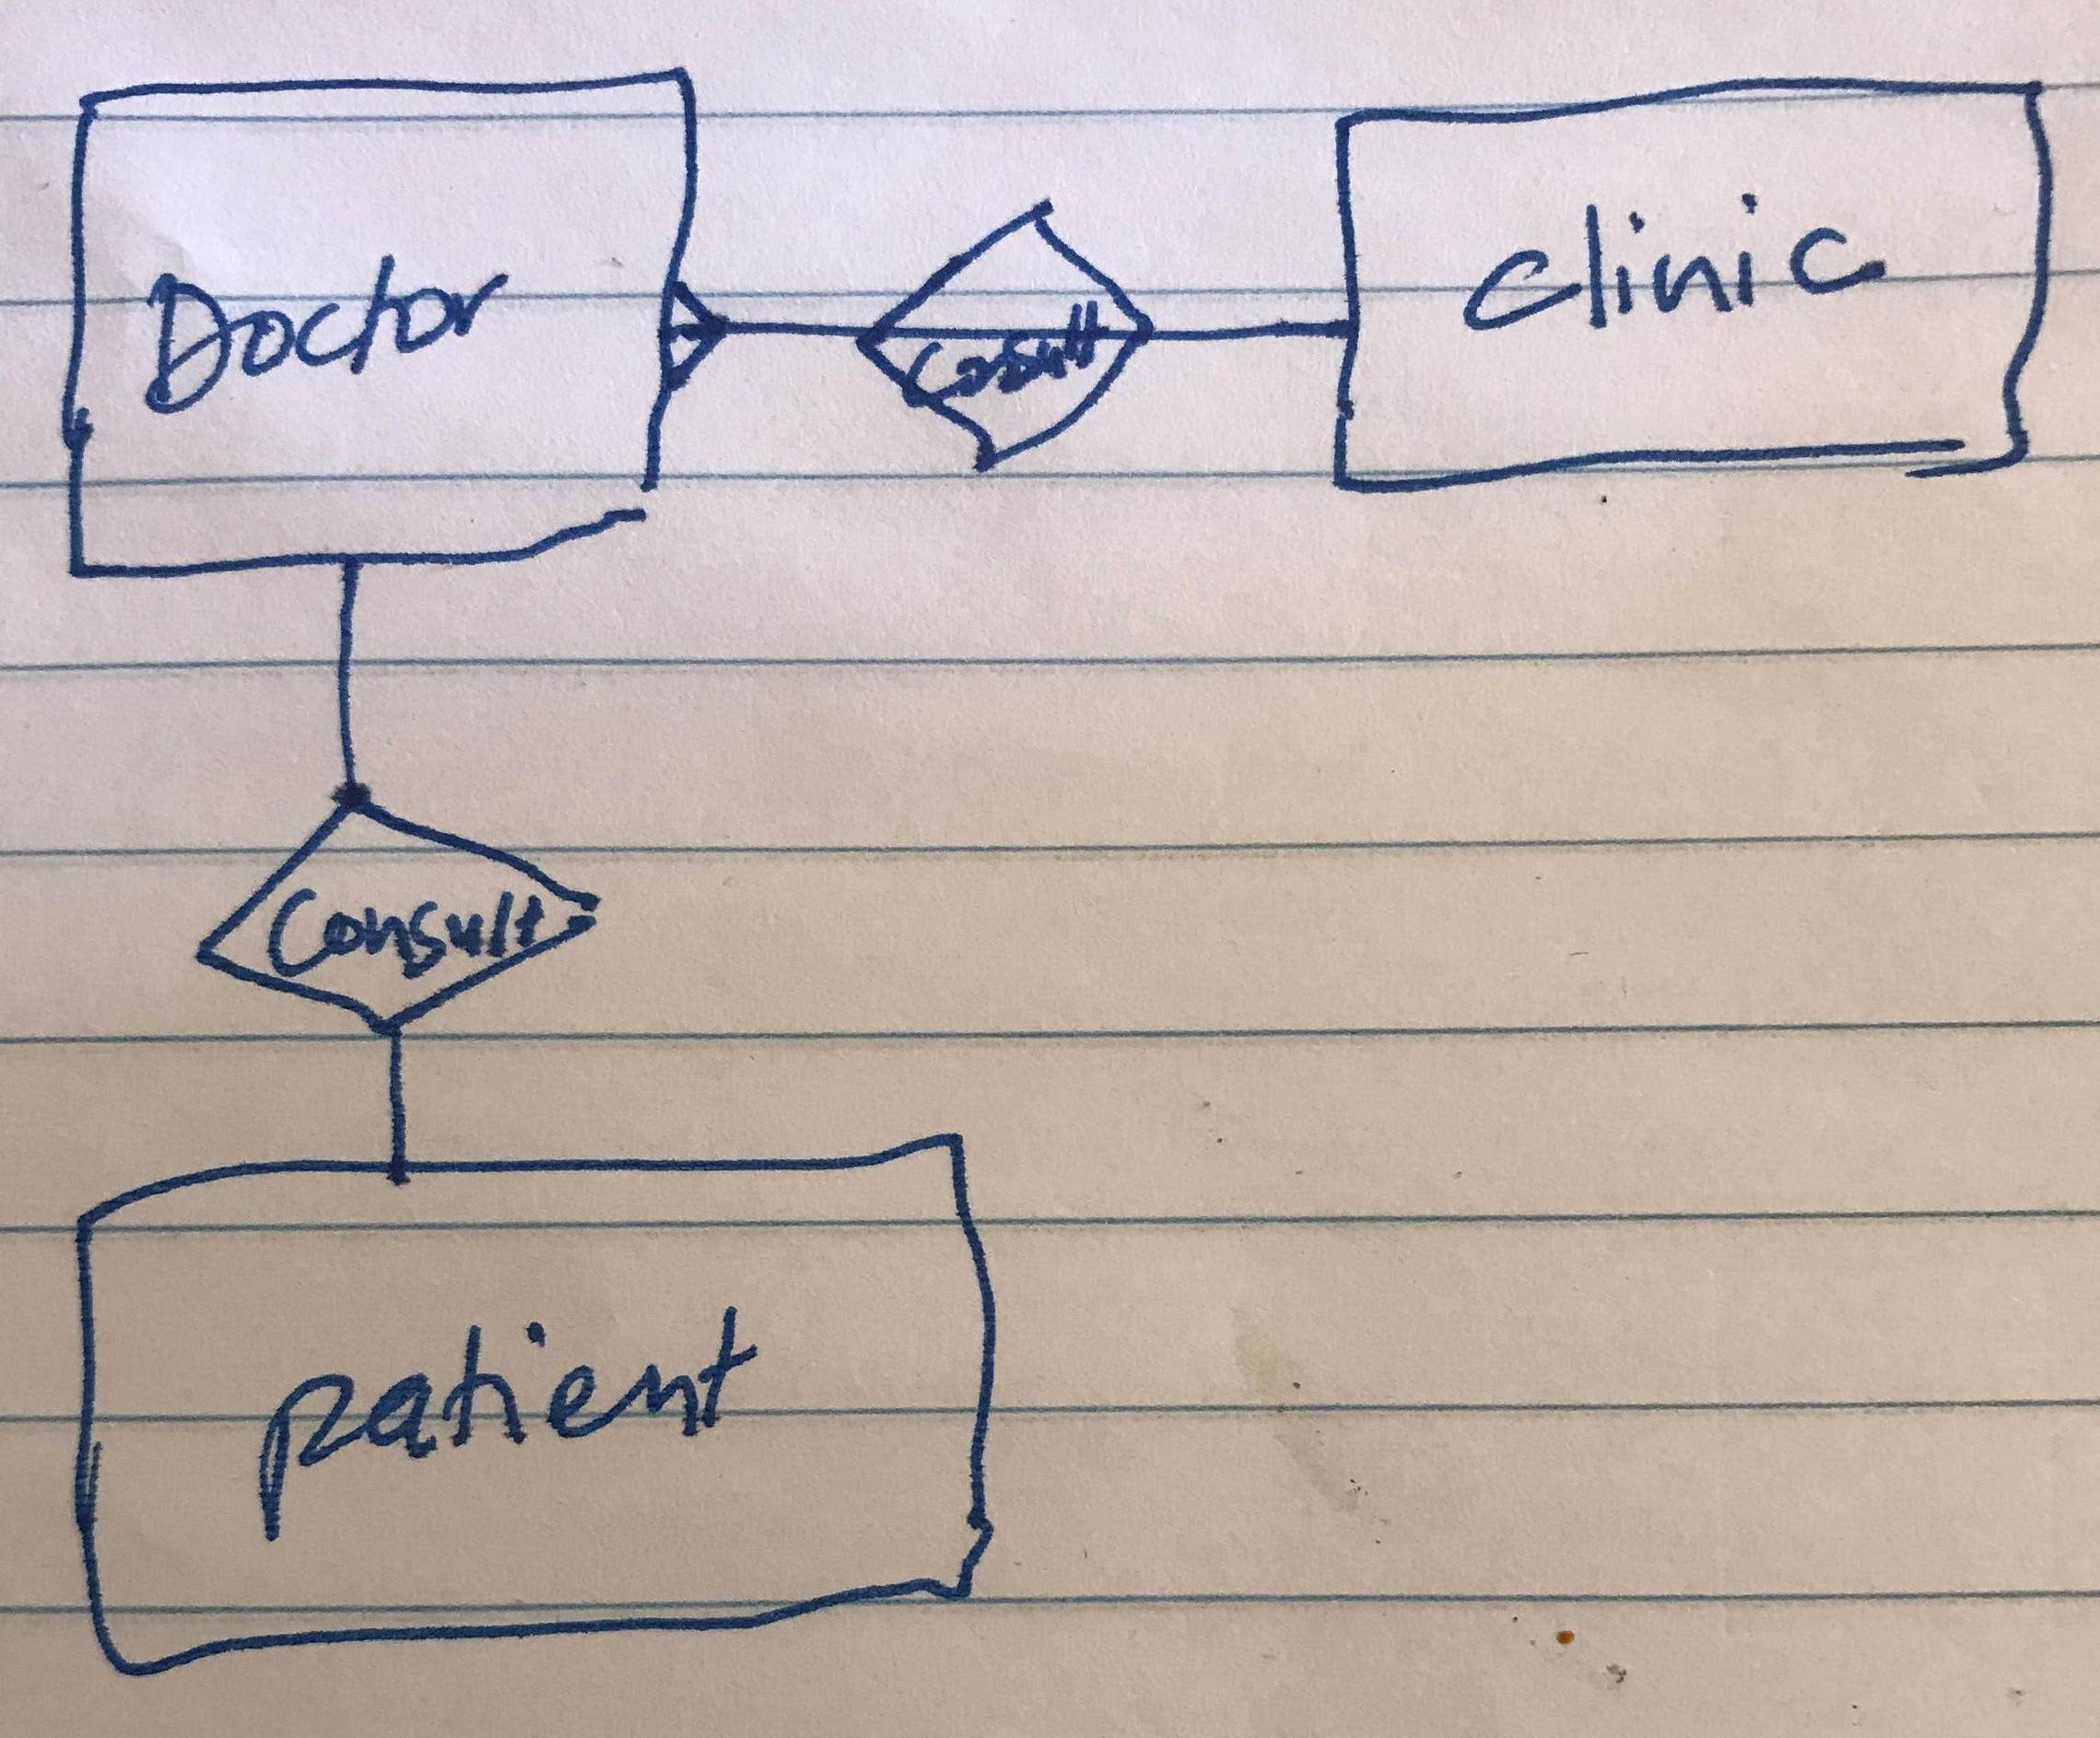 How Can I Draw An Entity-Relationship Diagram For A Medical